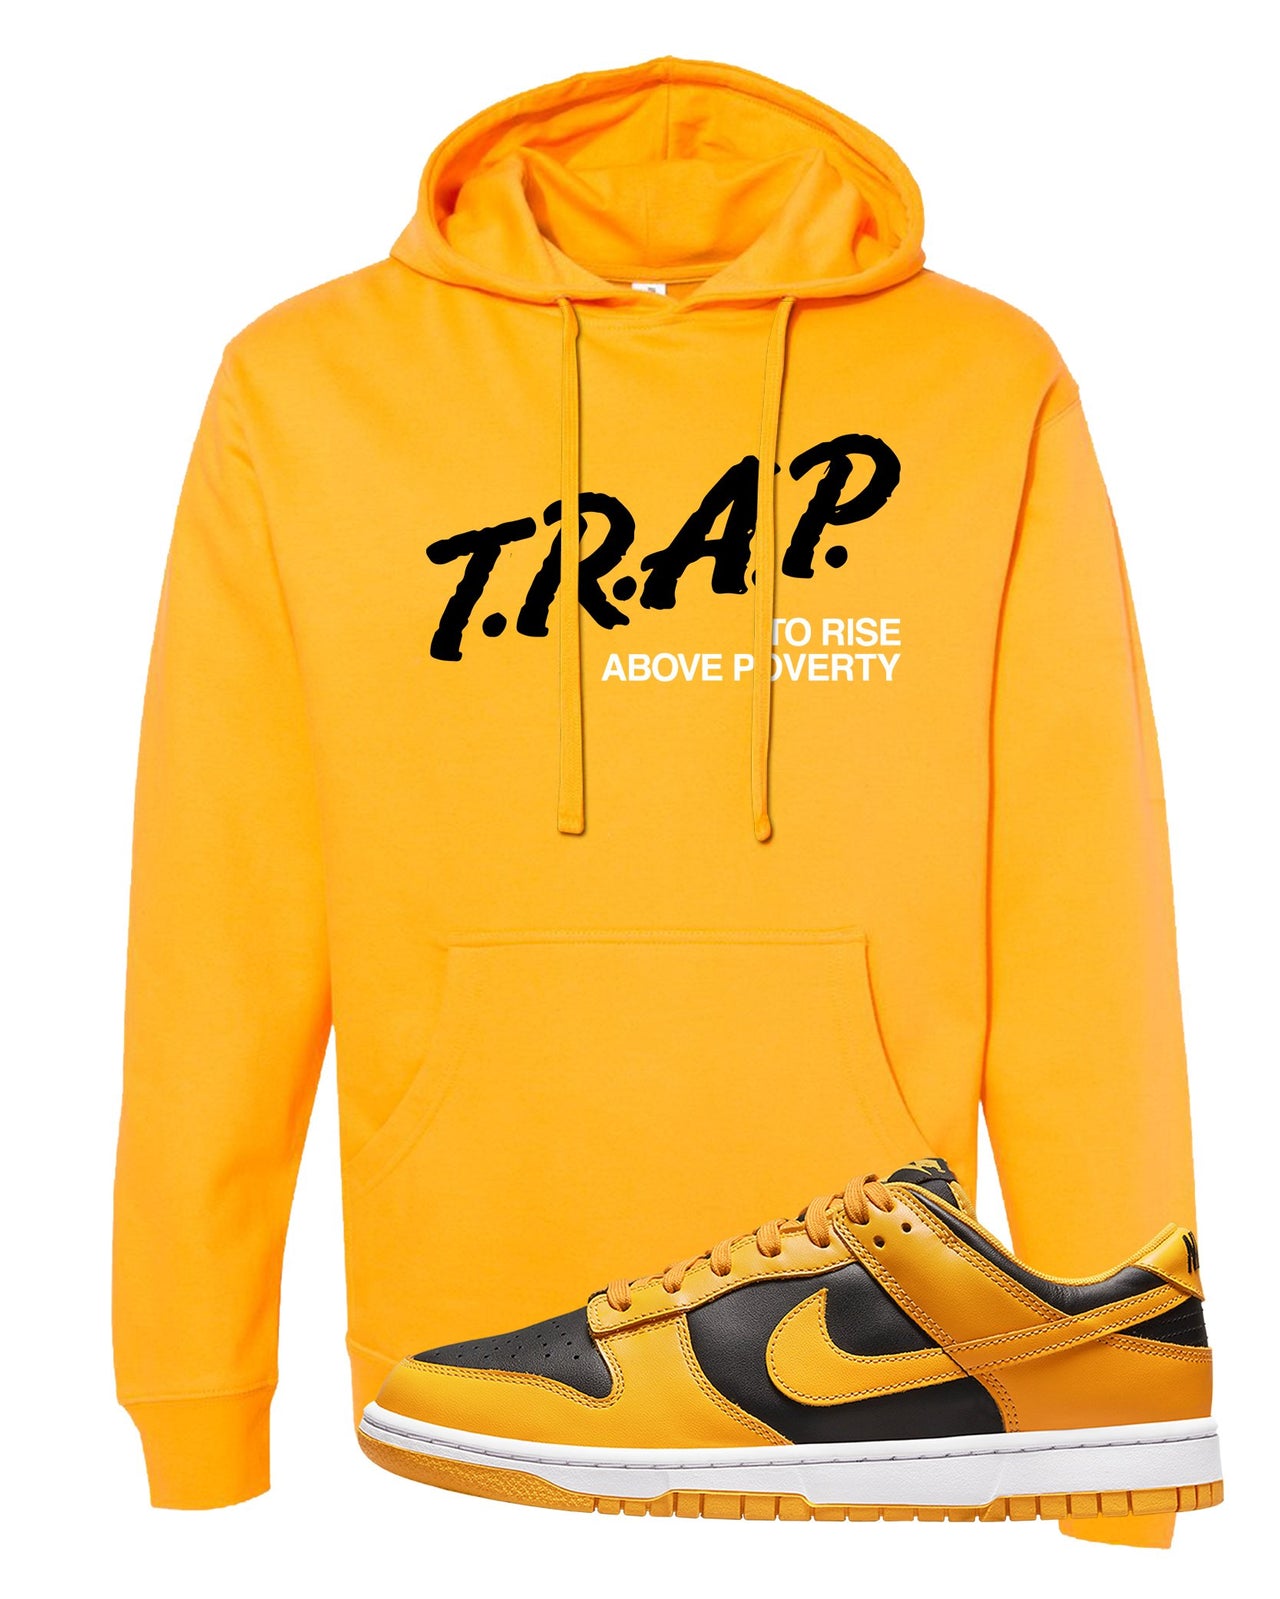 Goldenrod Low Dunks Hoodie | Trap To Rise Above Poverty, Gold